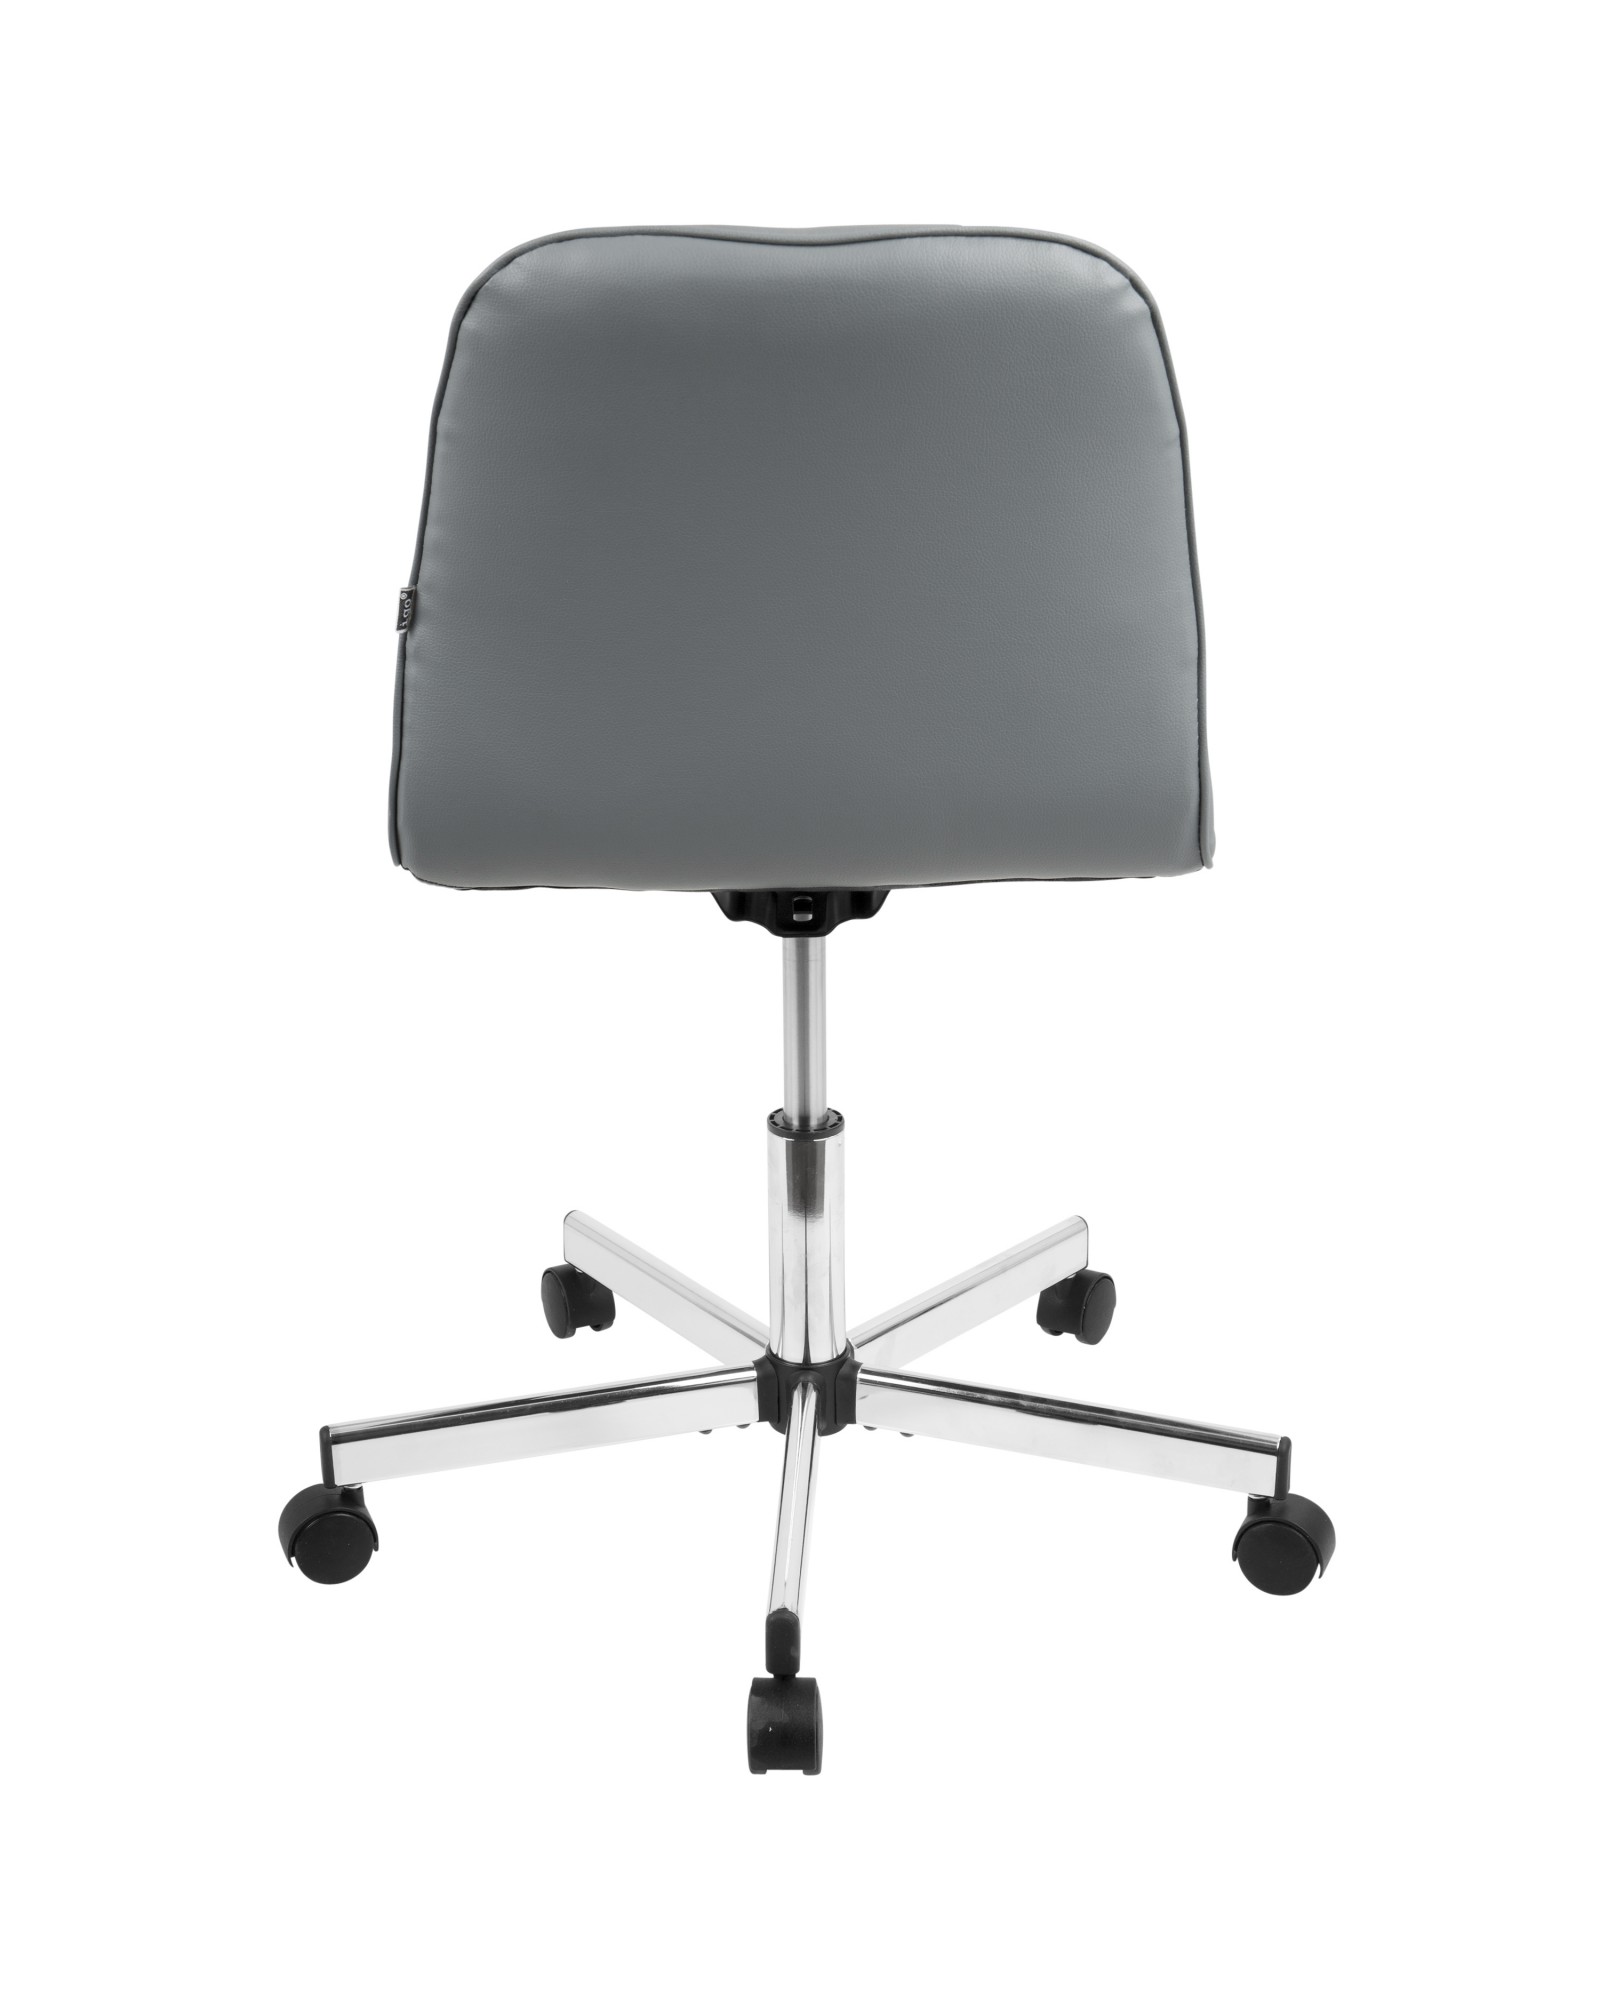 Cora Contemporary Task Chair in Grey Faux Leather